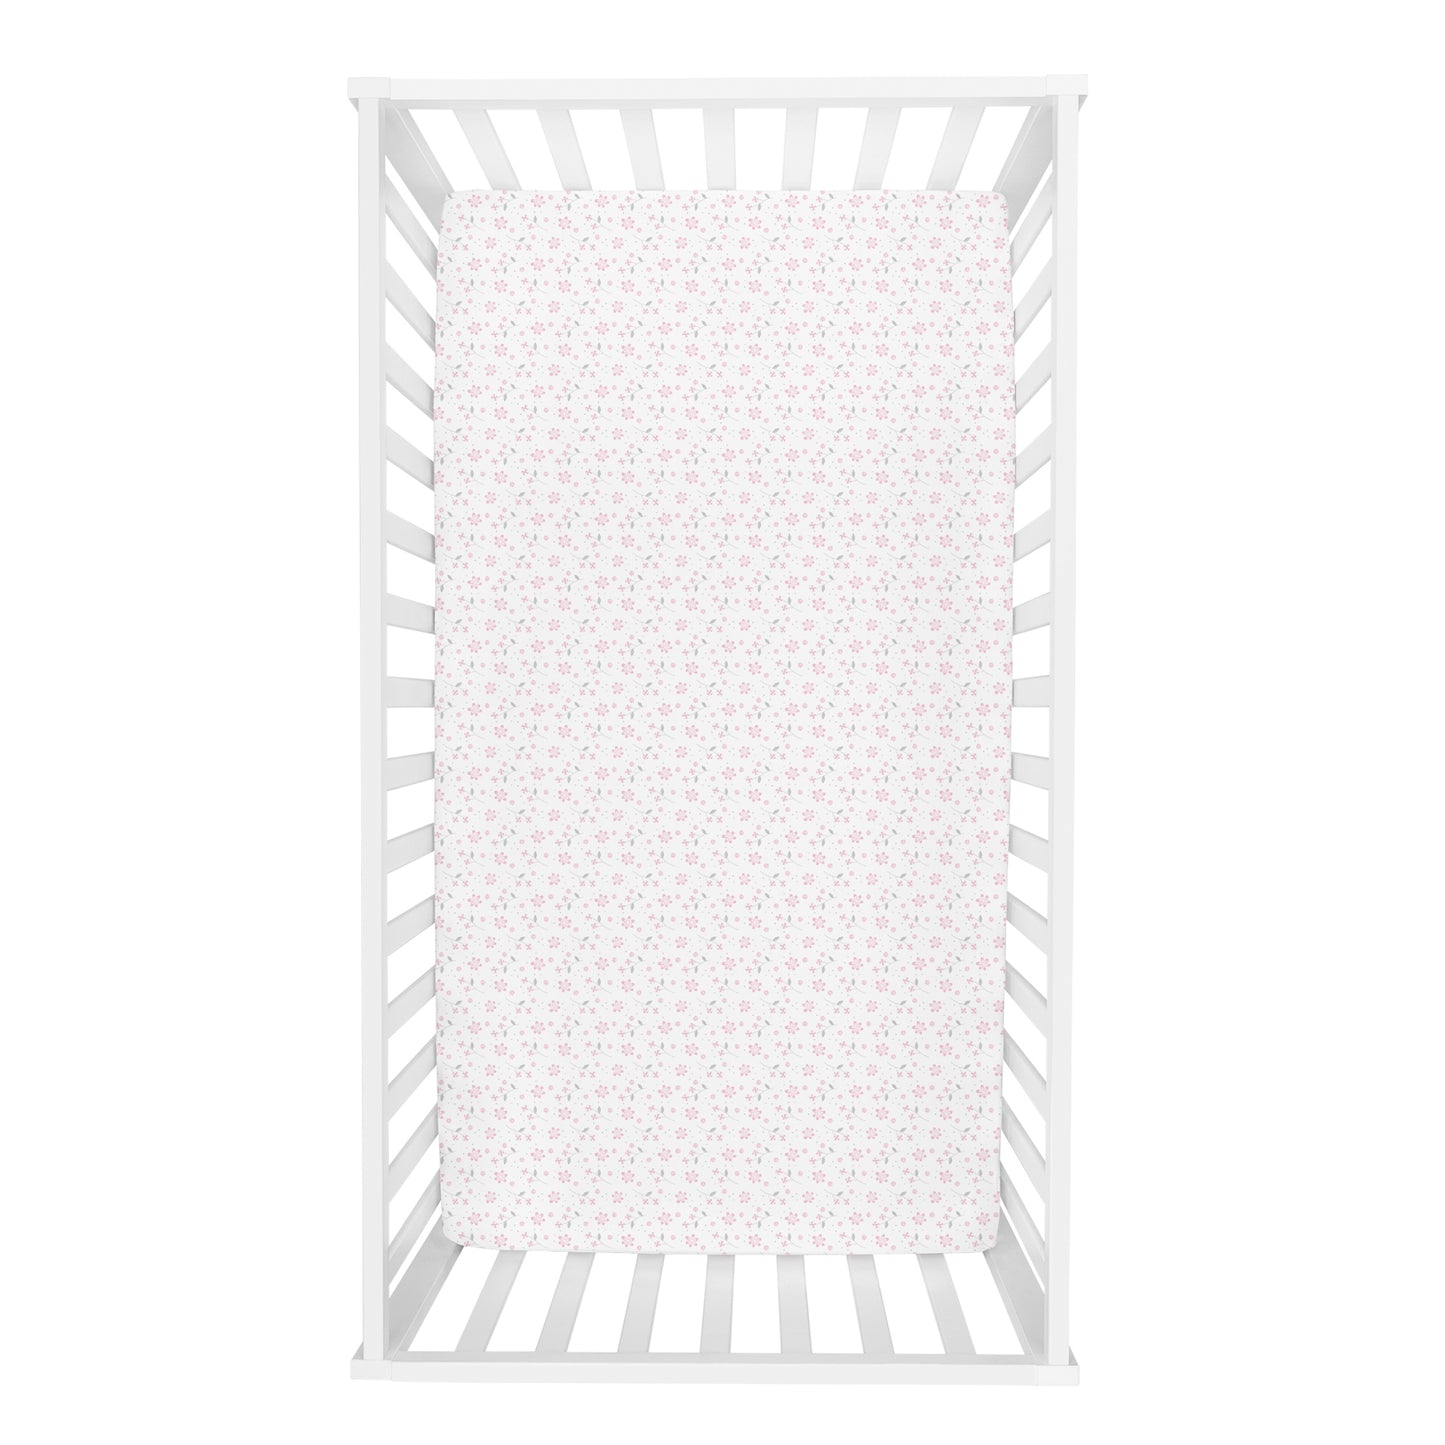  Floral 2-Pack Microfiber Fitted Crib Sheet by Sammy & Lou®;features a floral print in light pink and gray on a white background